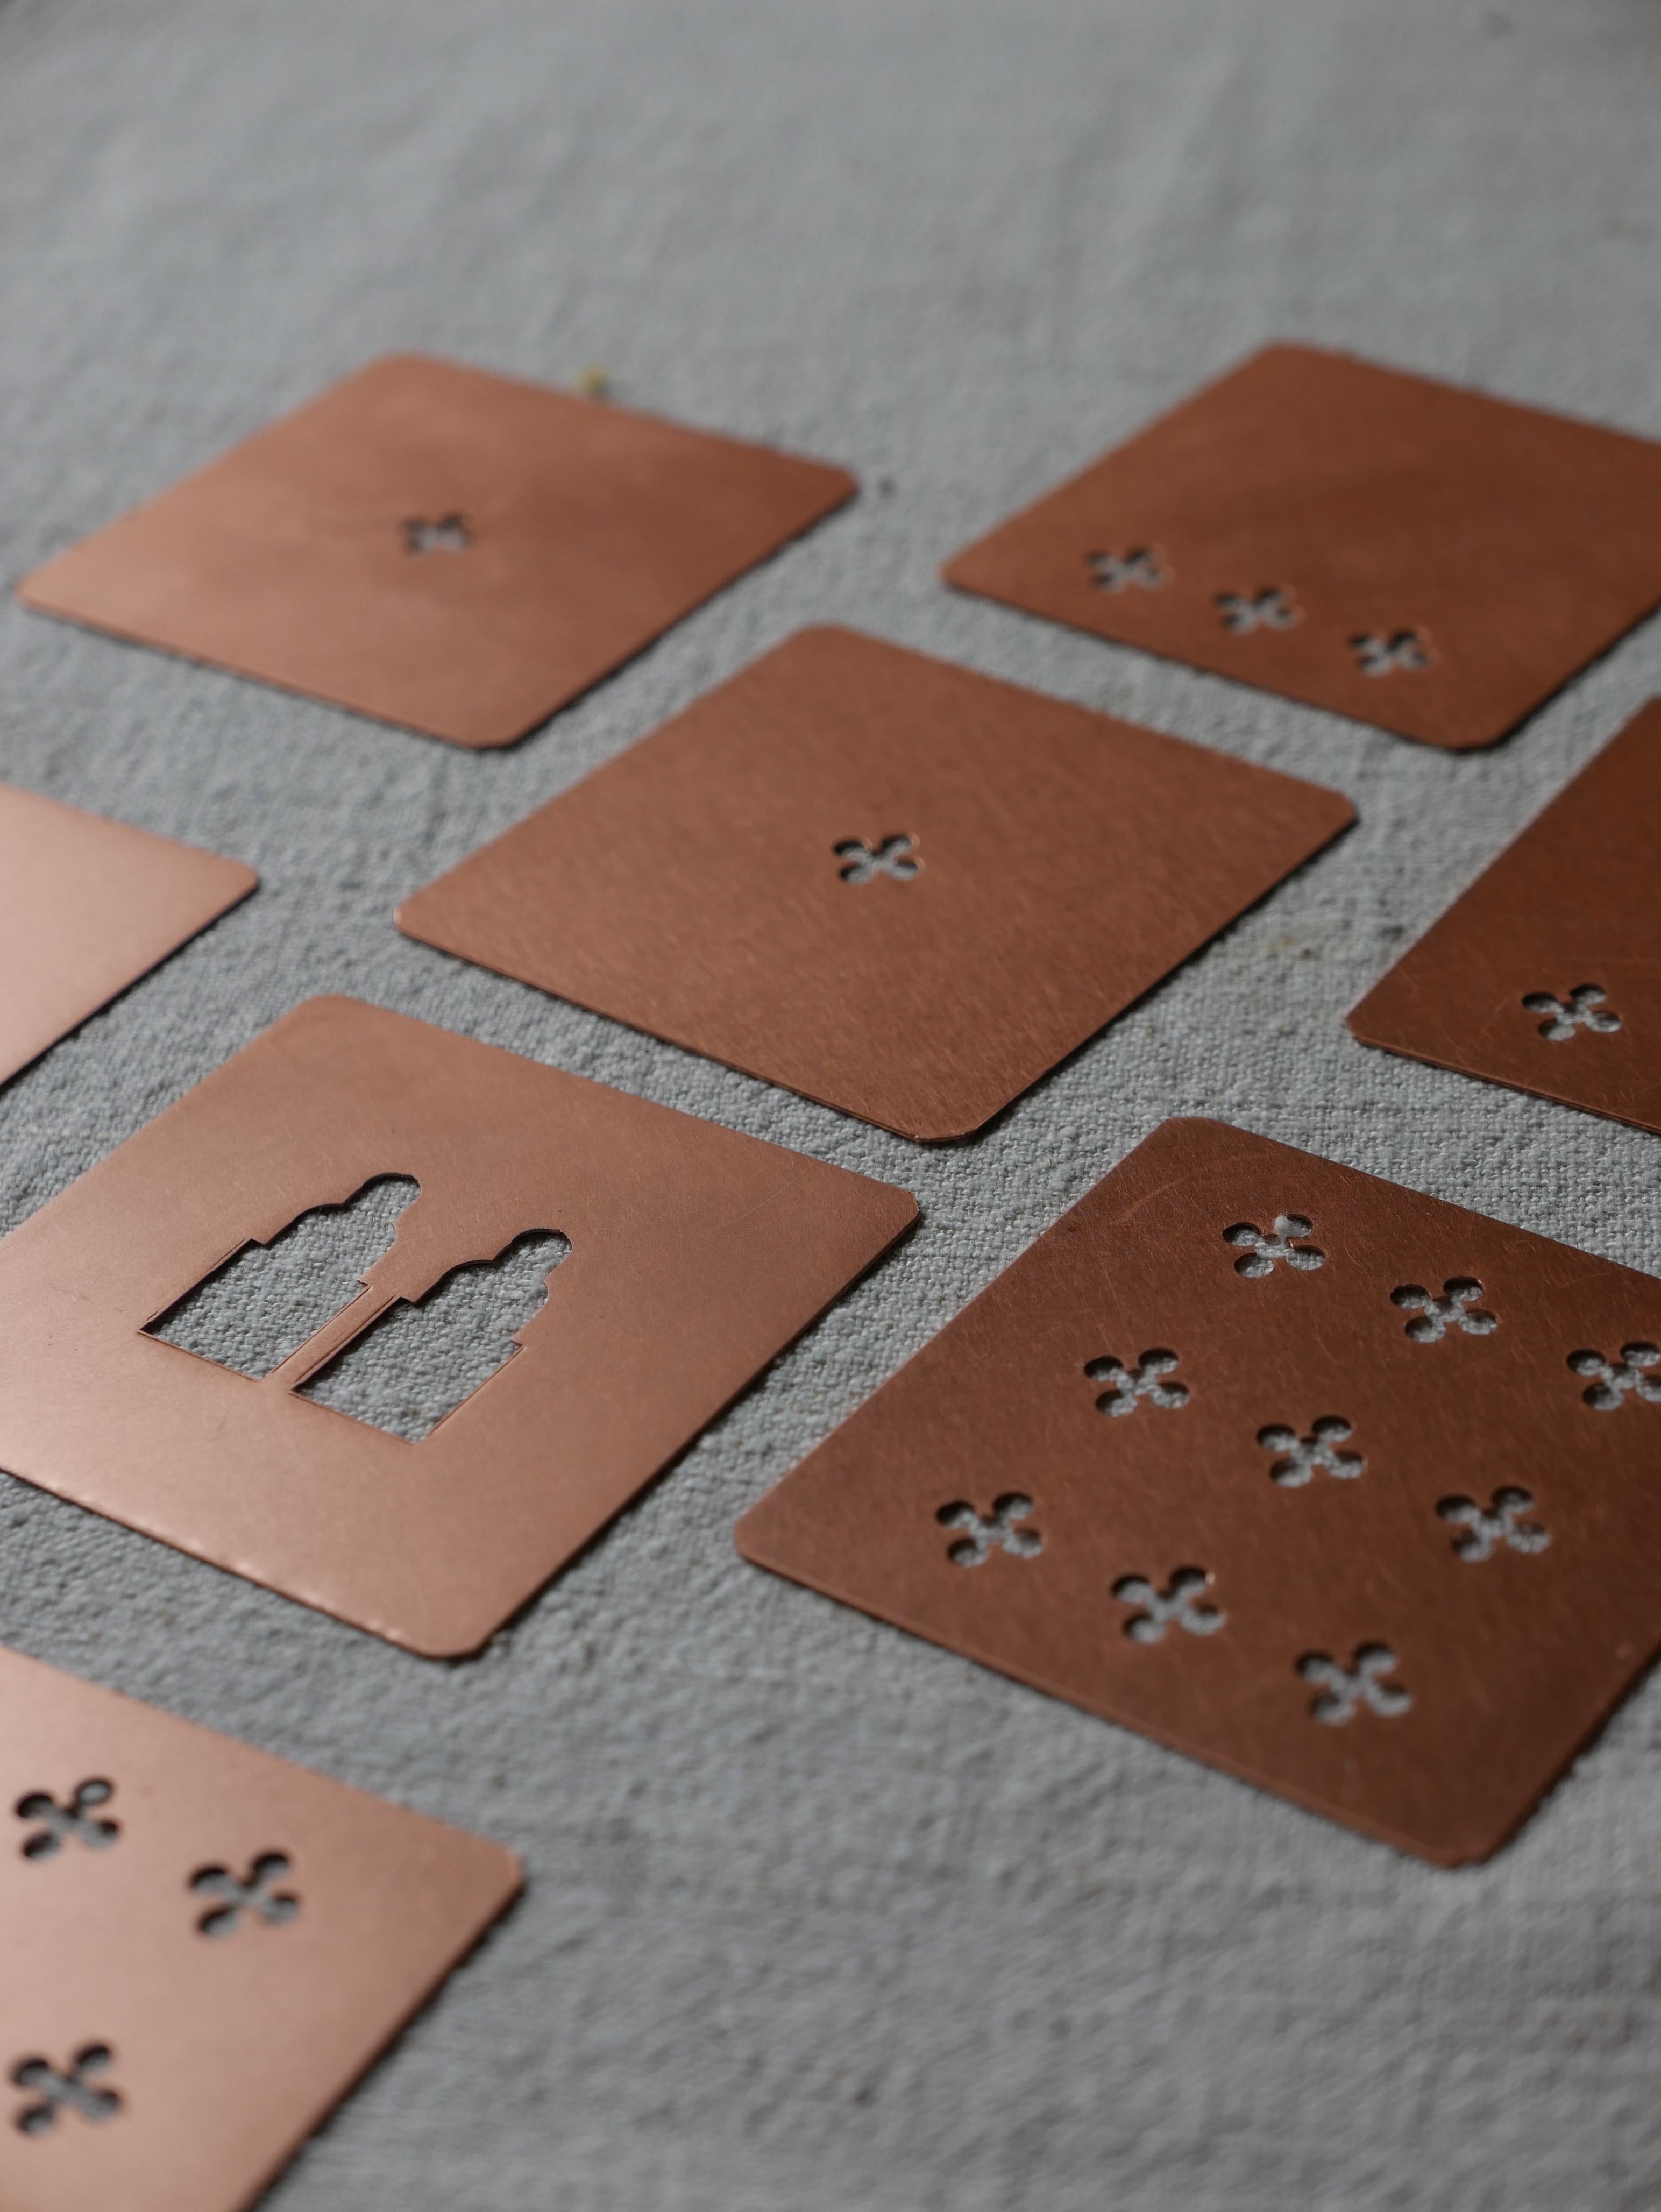 Copper Underglass Made in Italy Venice design 8 Pieces Hand Made.
8 underglass copper foil cut and engraved using a punch tool, following the contour of the architectural elements, typical of the 16th century Venetian palaces. Mixed decoration
 